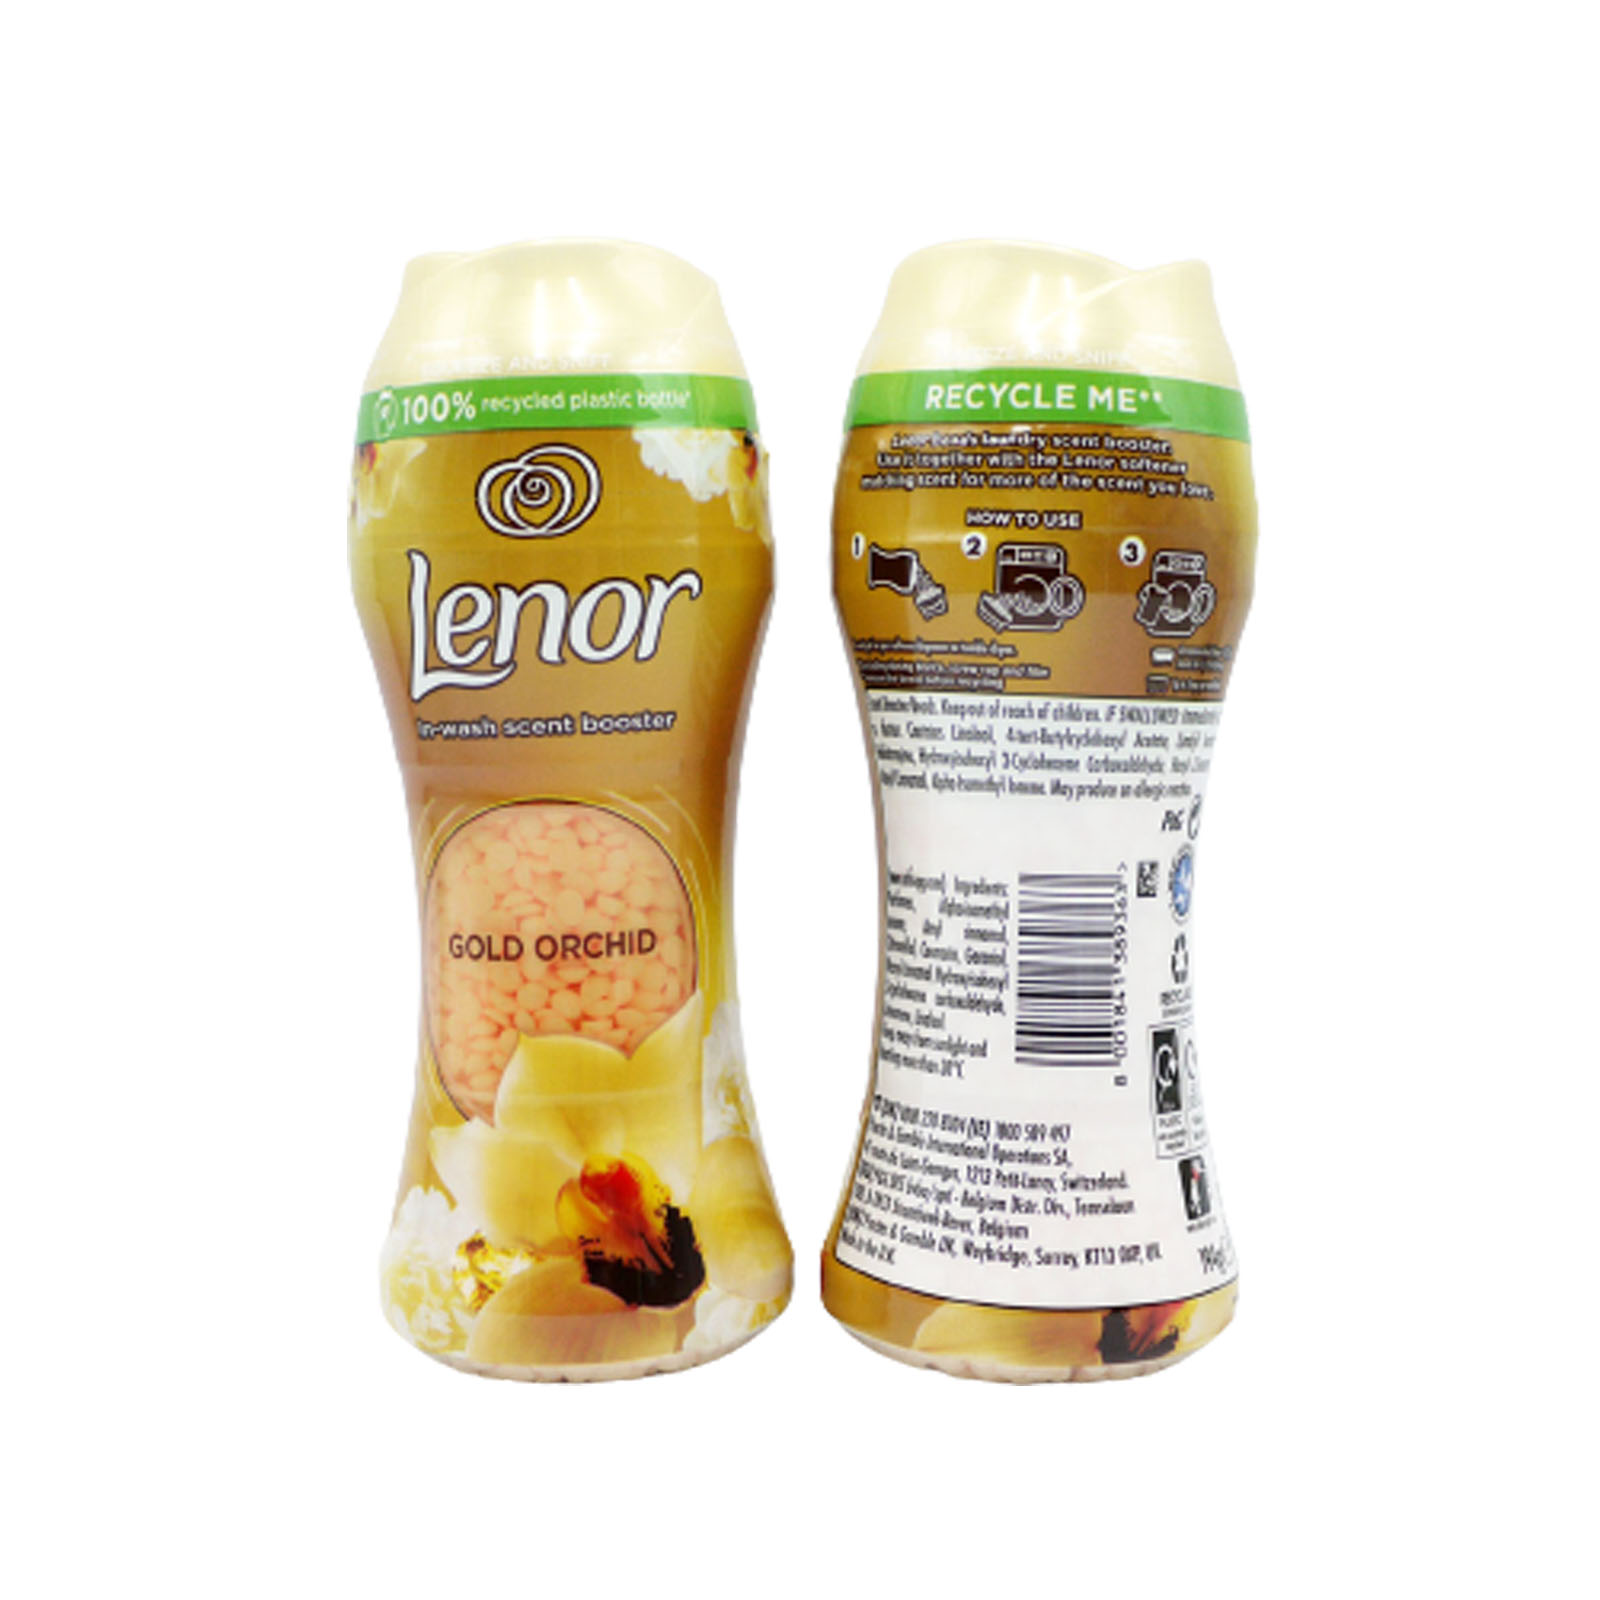 Lenor In Wash Sent Booster Gold Orchid 194g